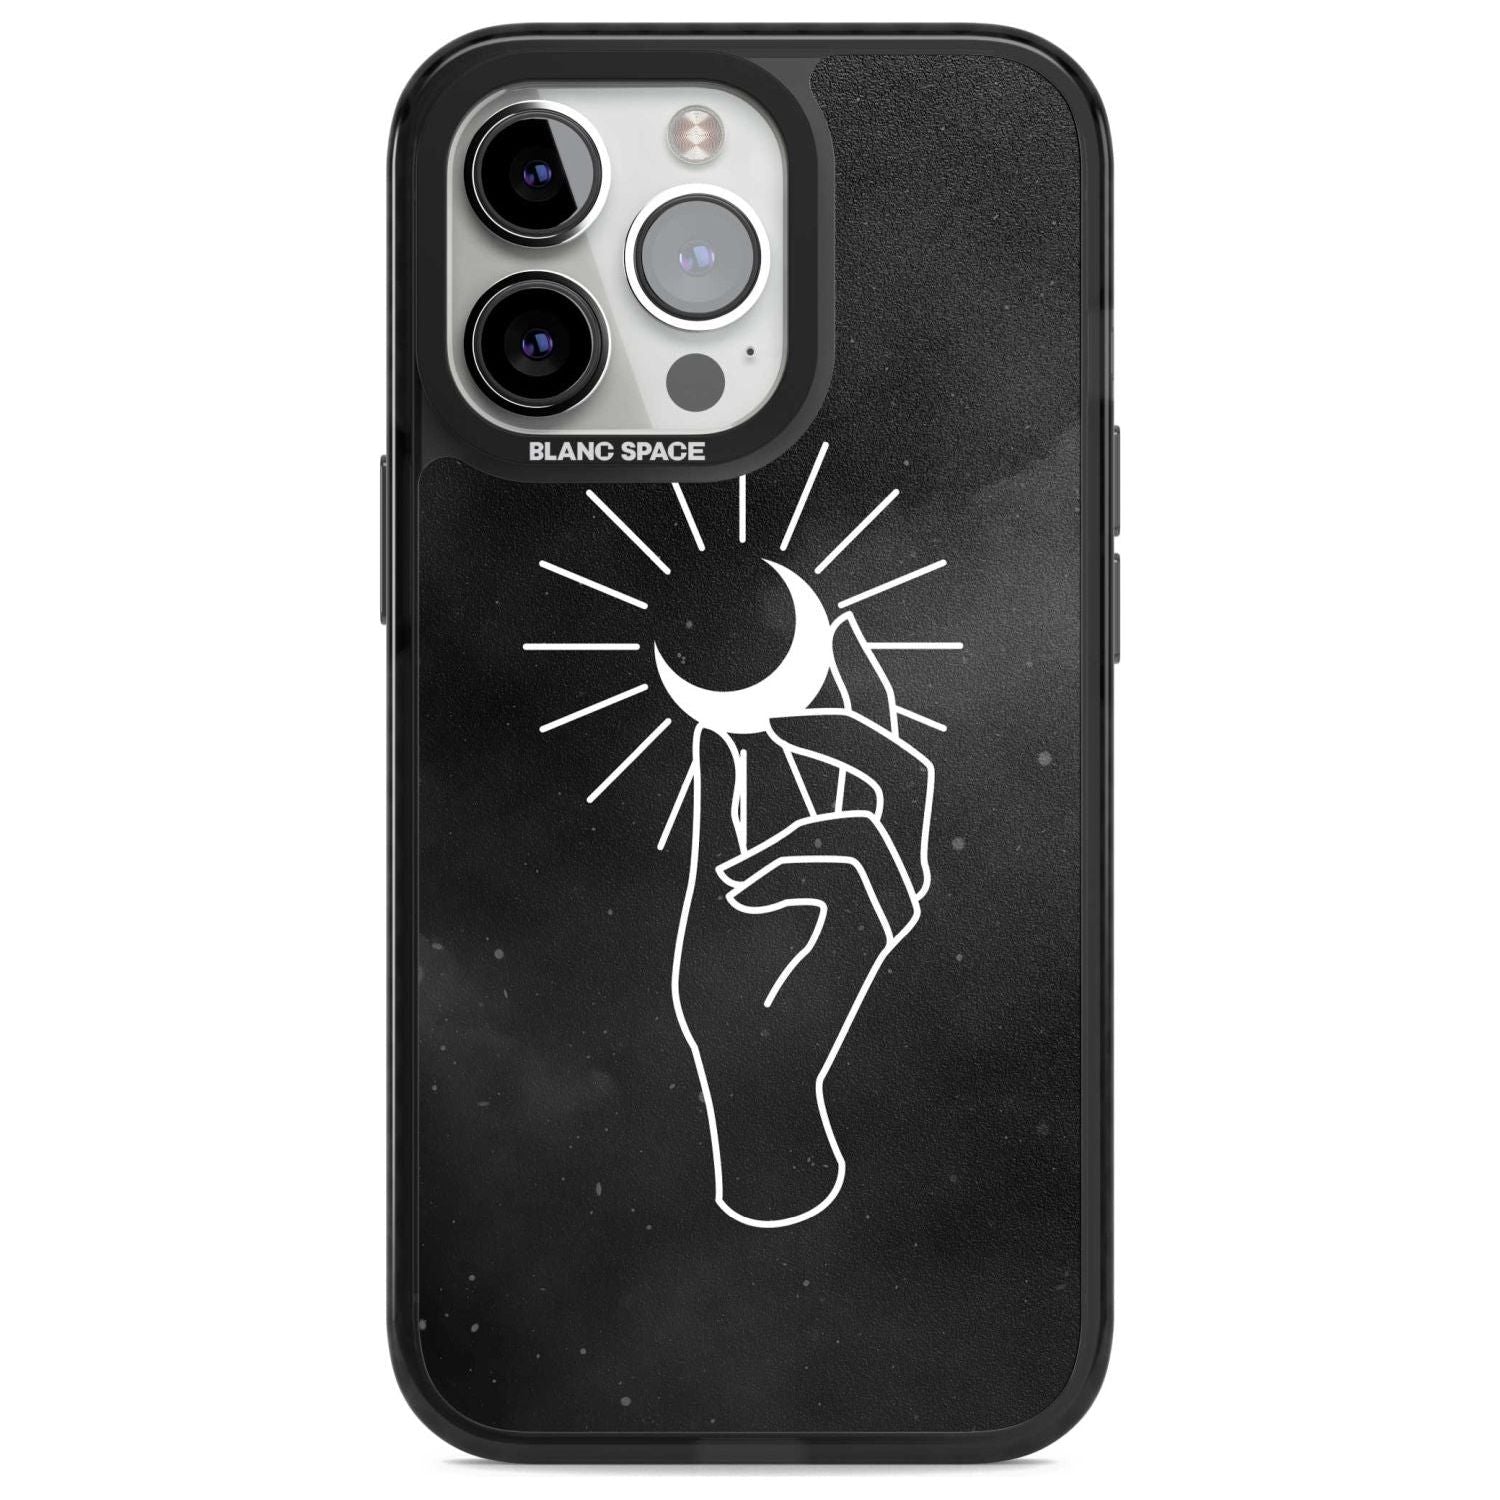 Hand Holding Moon Phone Case iPhone 15 Pro Max / Magsafe Black Impact Case,iPhone 15 Pro / Magsafe Black Impact Case,iPhone 14 Pro Max / Magsafe Black Impact Case,iPhone 14 Pro / Magsafe Black Impact Case,iPhone 13 Pro / Magsafe Black Impact Case Blanc Space